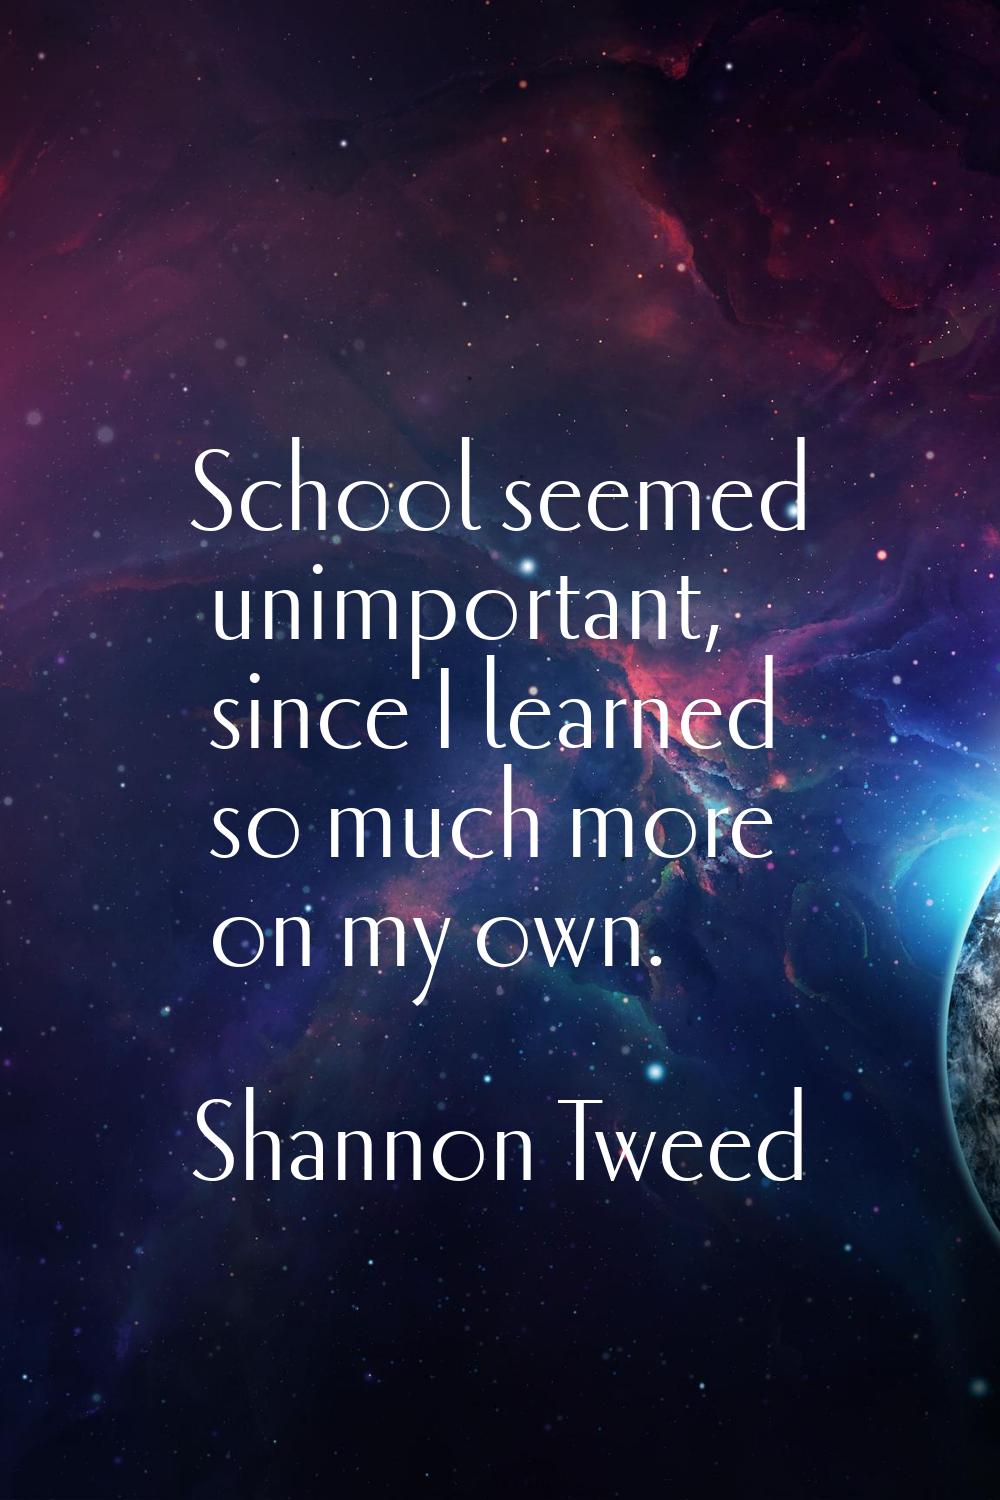 School seemed unimportant, since I learned so much more on my own.